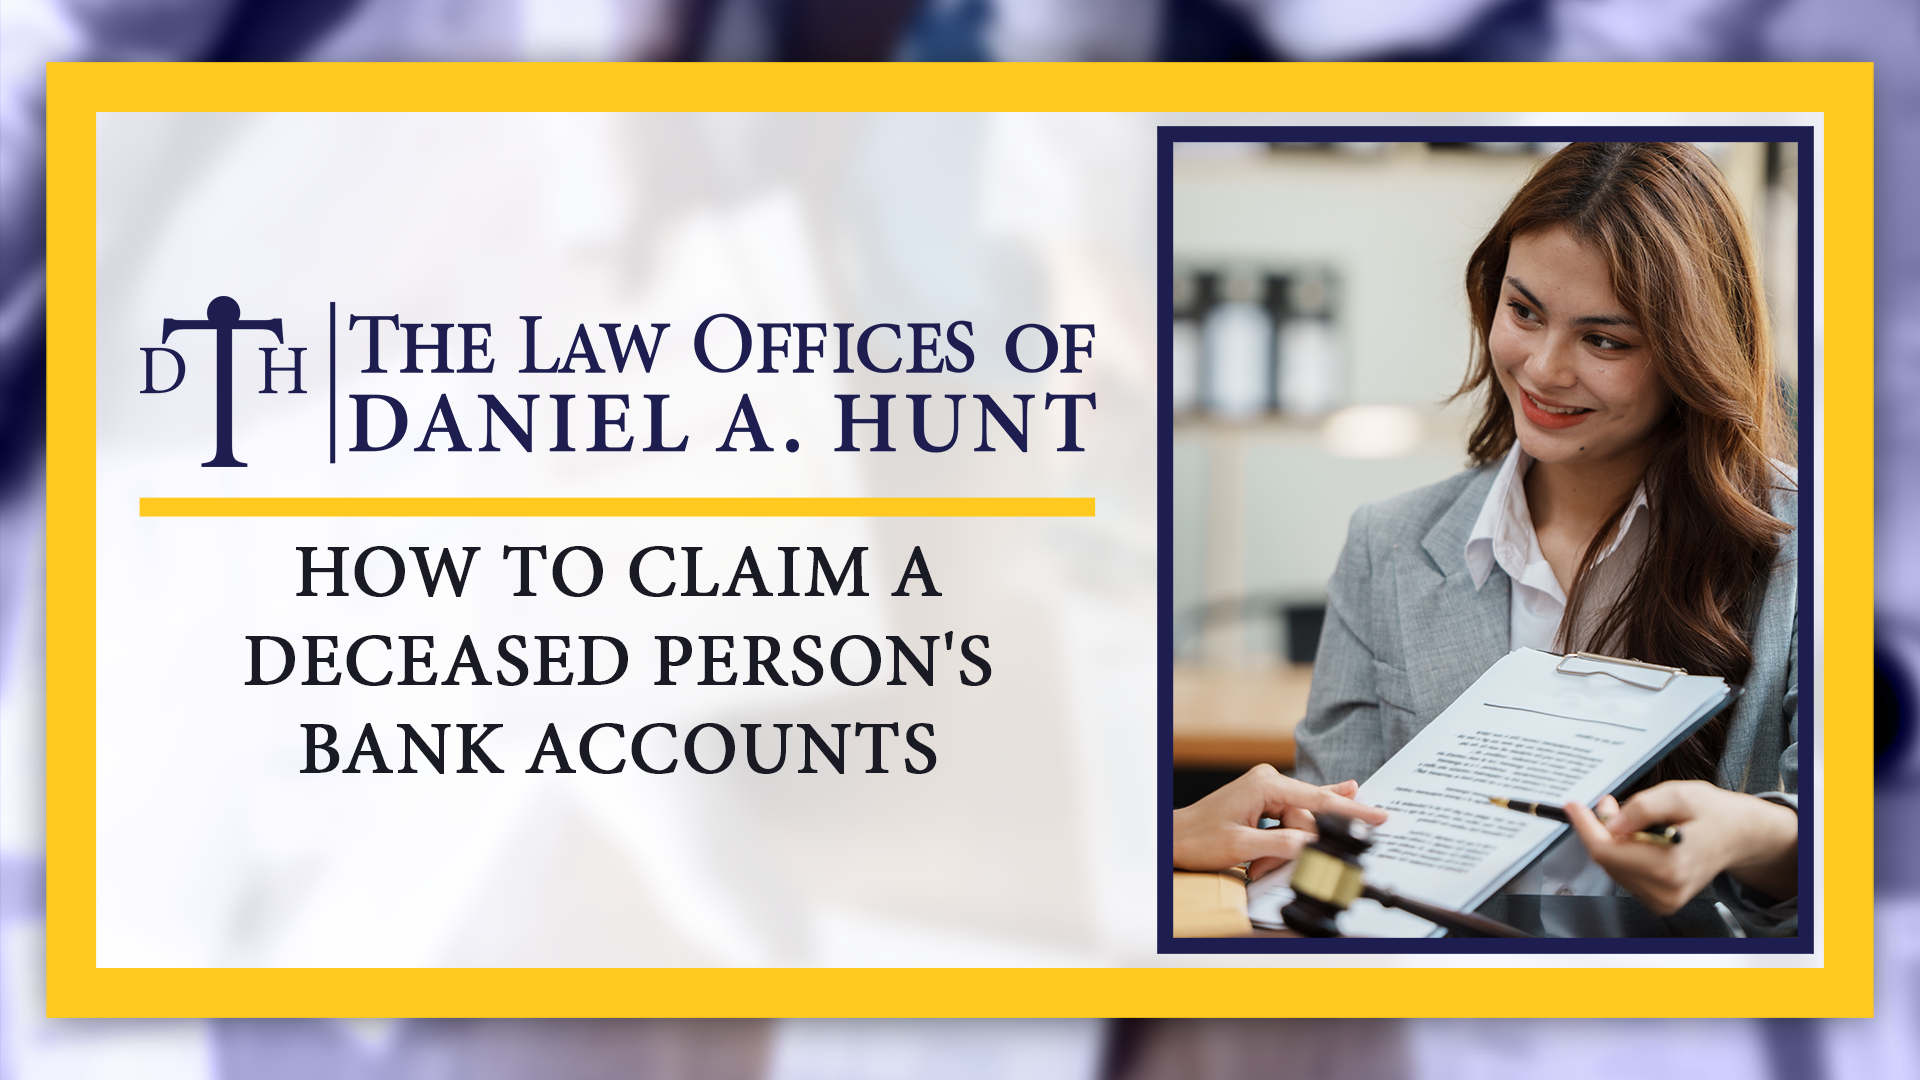 How to Claim a Deceased Person's Bank Account